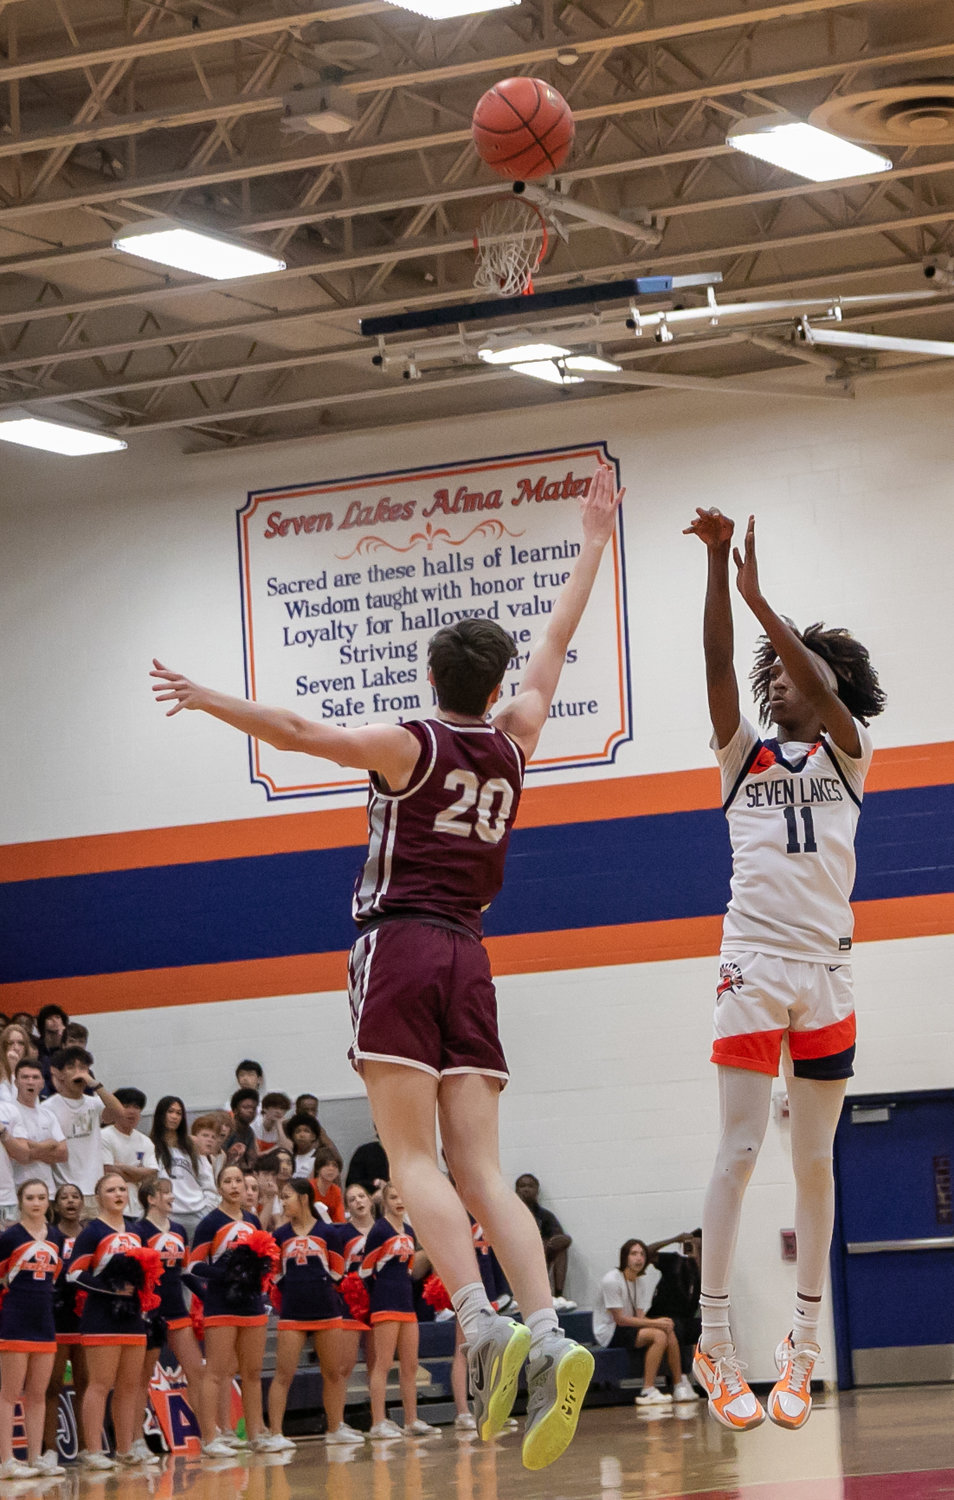 Nasir Price shoots a 3-pointer during Saturday's game between Seven Lakes and Cinco Ranch at the Seven Lakes gym.